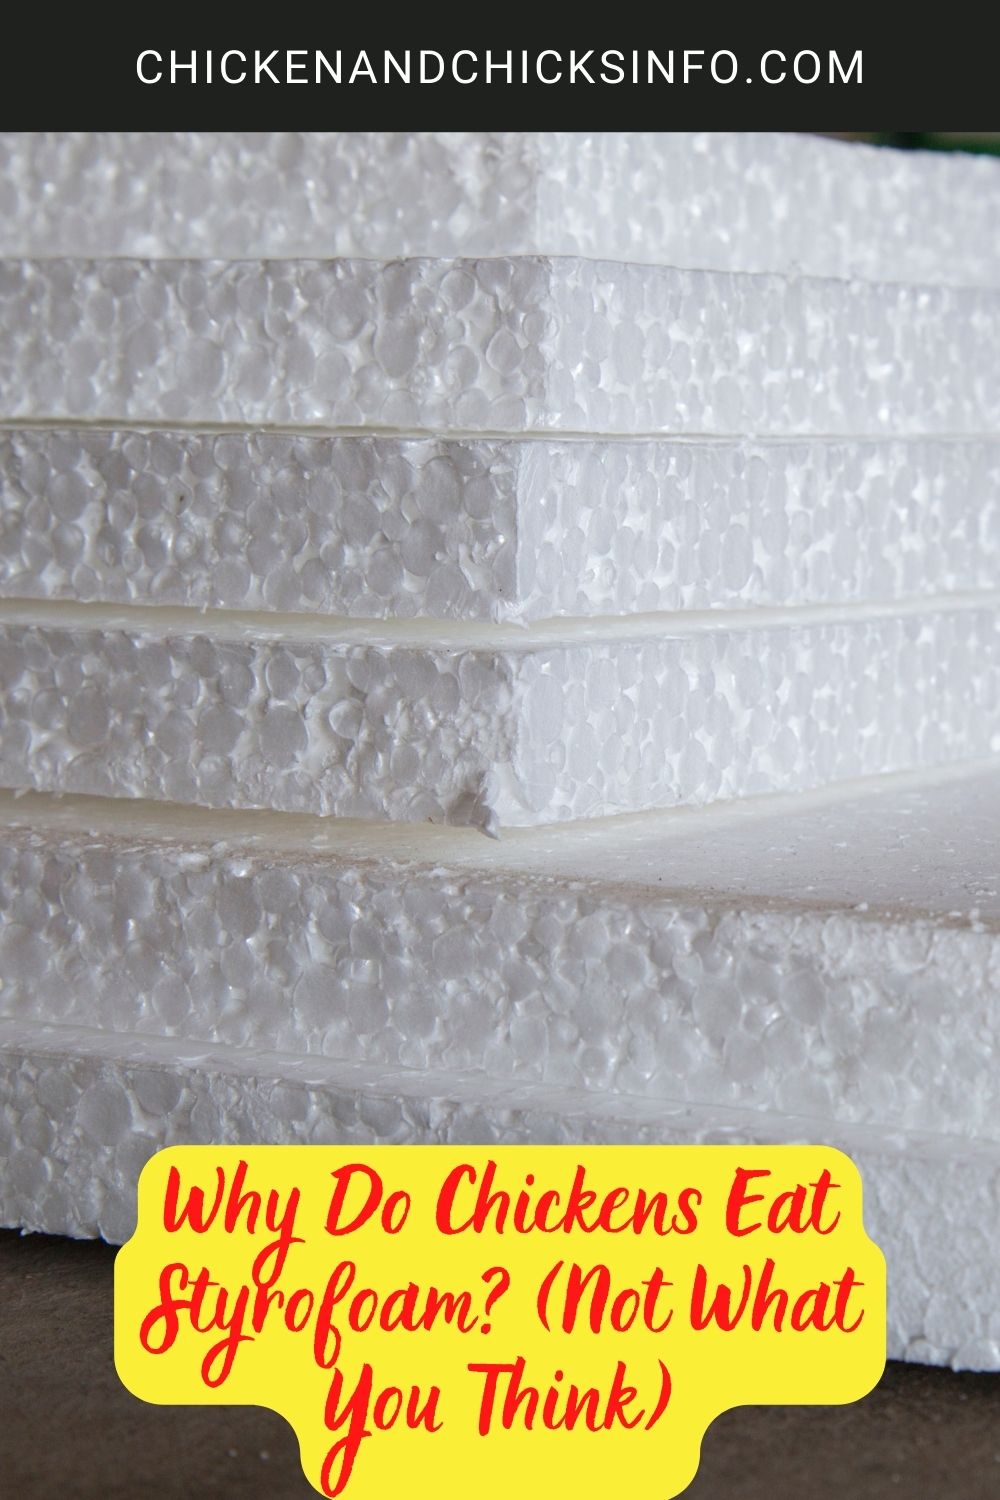 Why Do Chickens Eat Styrofoam? (Not What You Think) poster.
